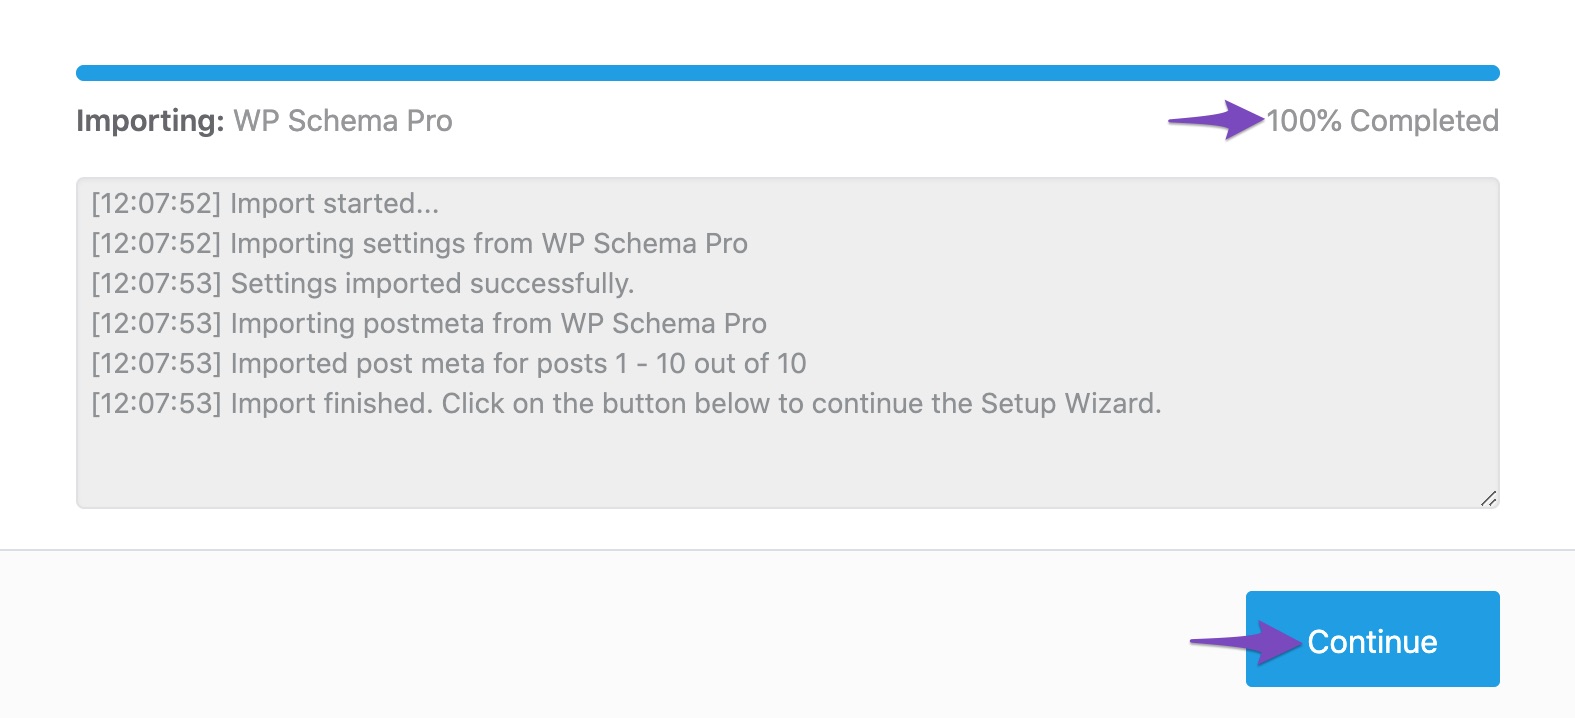 Importing data from WP Schema Pro completed